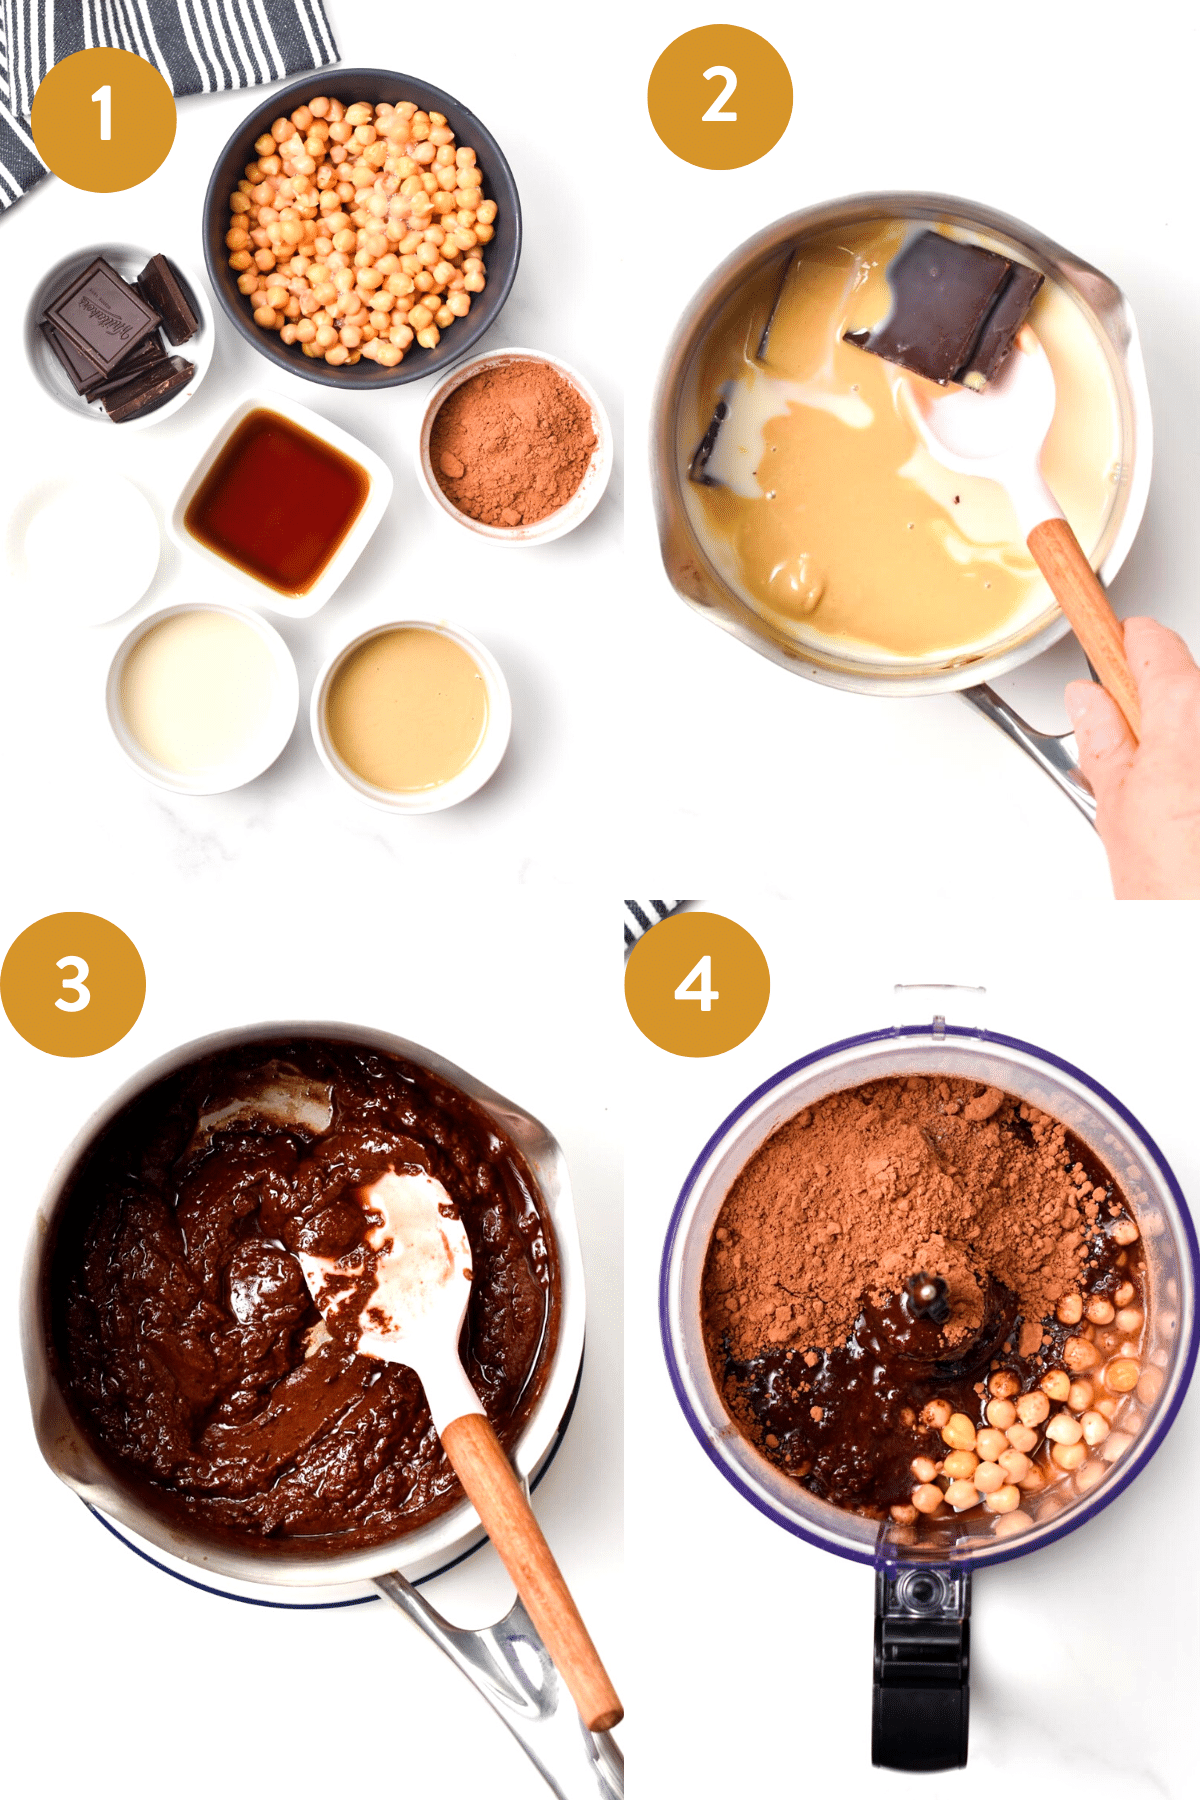 This Dark Chocolate Hummus is an easy, healthy high-protein snack with the most delicious creamy chocolate texture. If you love hummus, this dessert hummus recipe is a must-try.